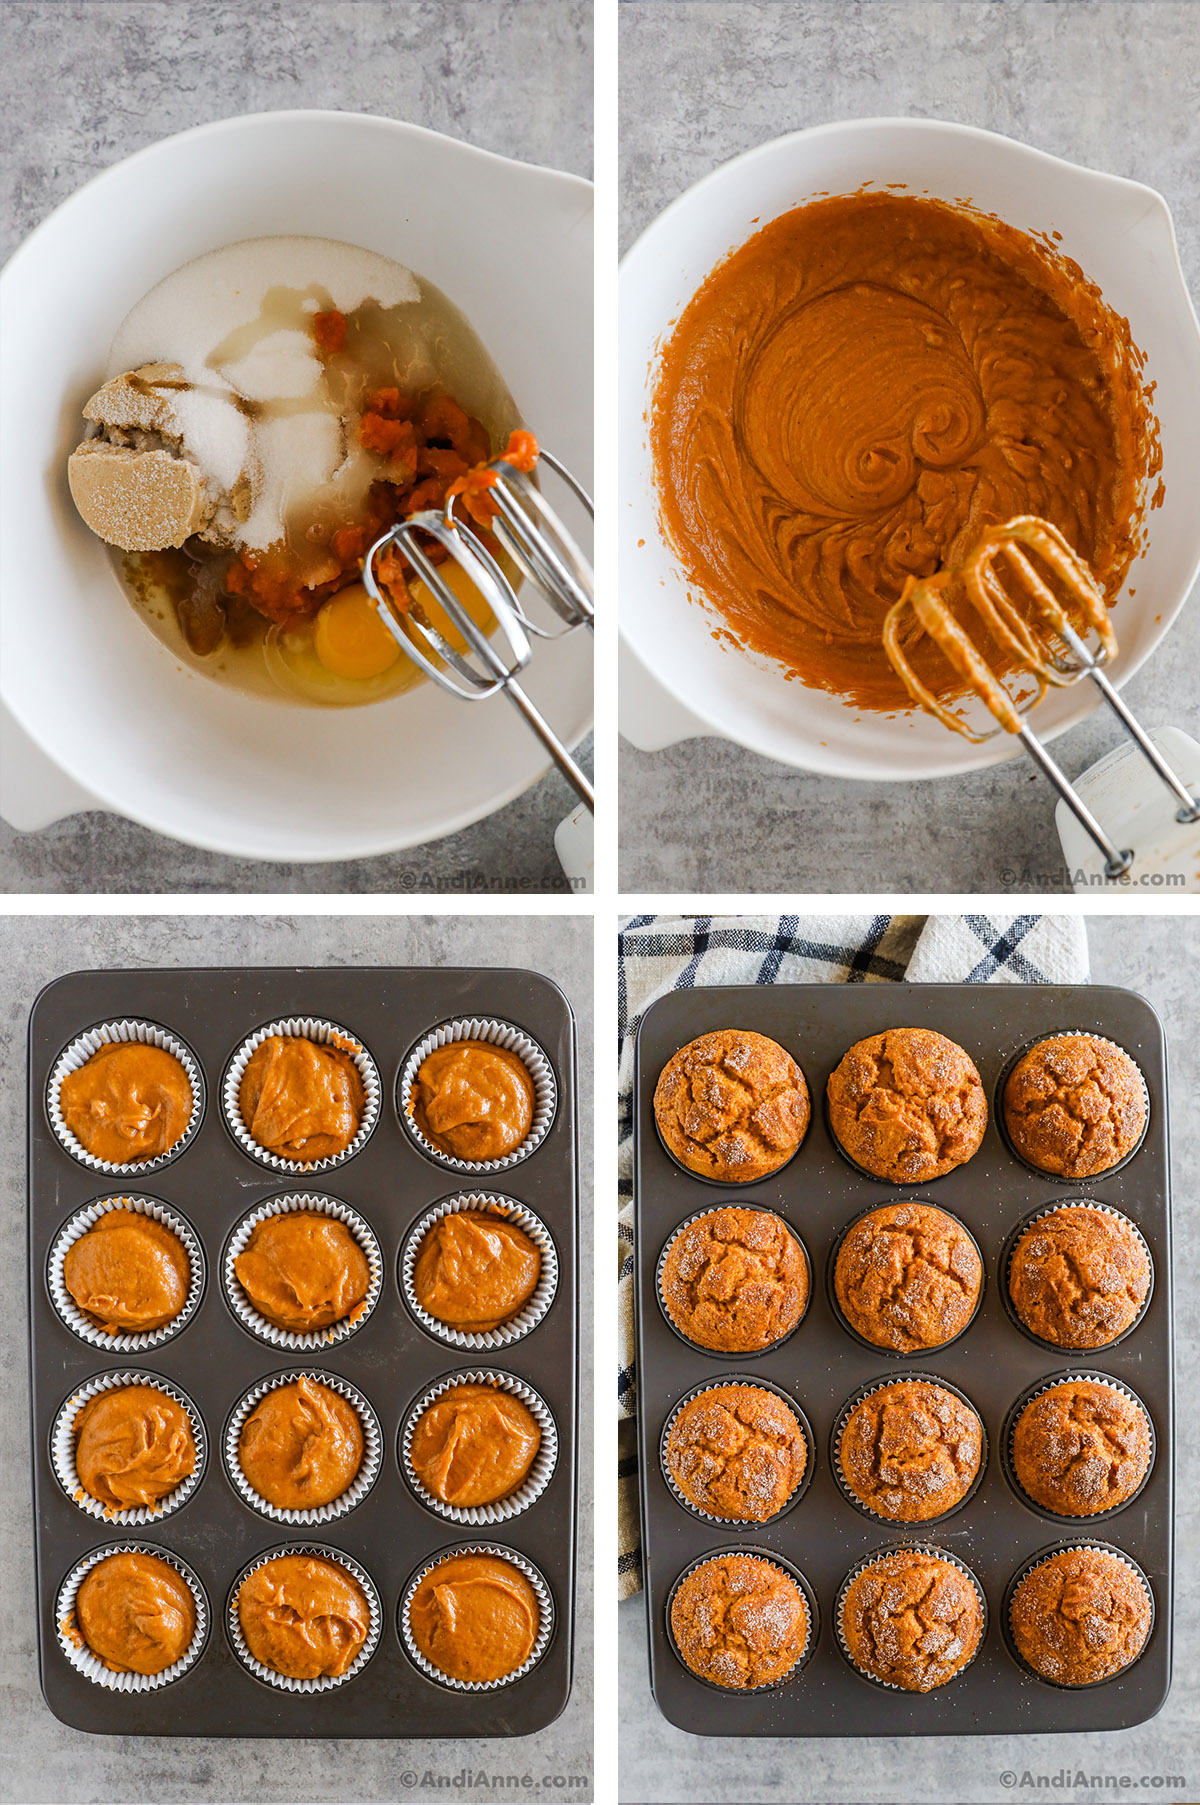 Four images of various steps to make recipe. First two are muffin batter in bowl in various stages with hand mixer. Second two are muffins in muffin pan, first unbaked, then baked.